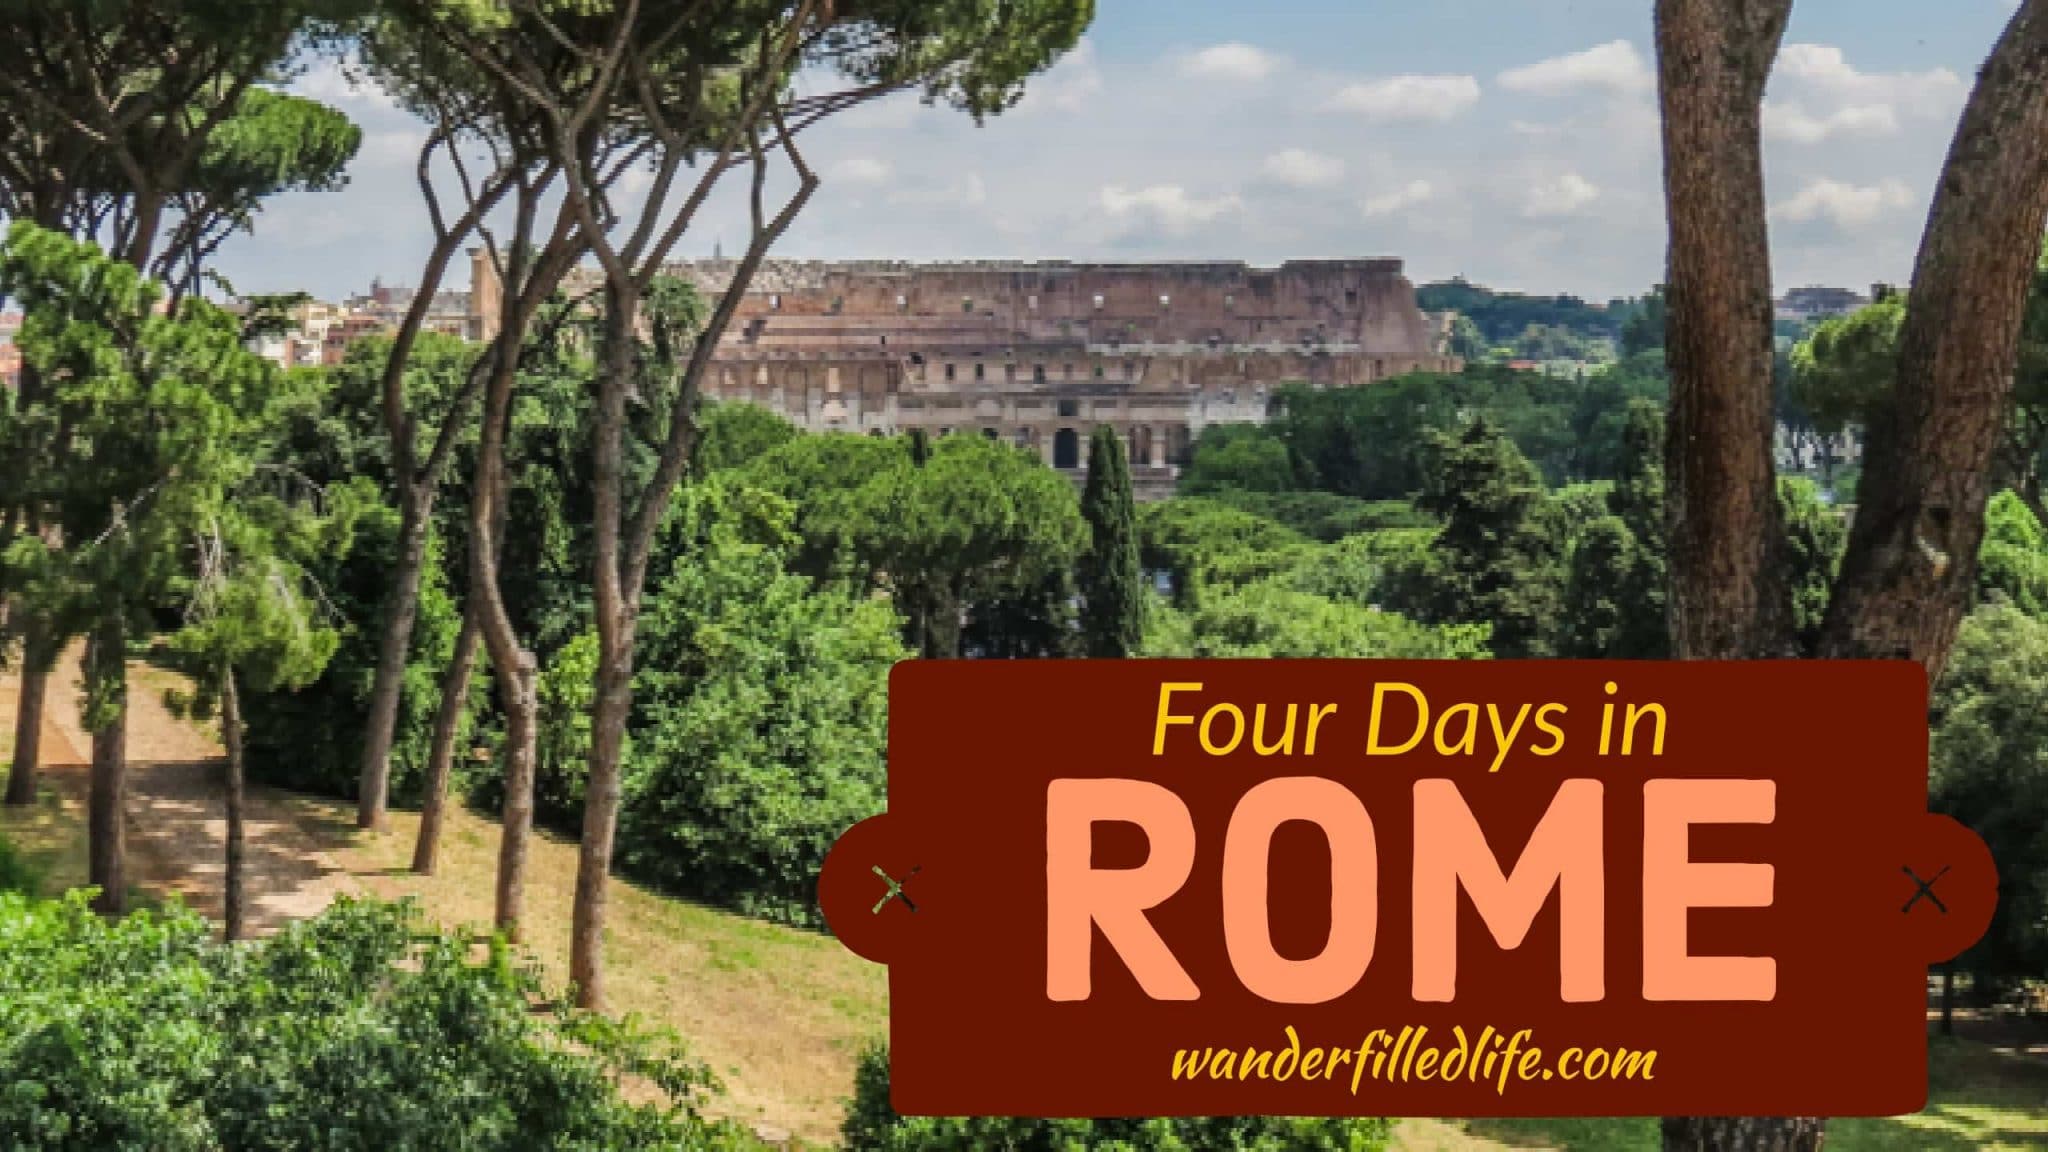 Four Days in Rome